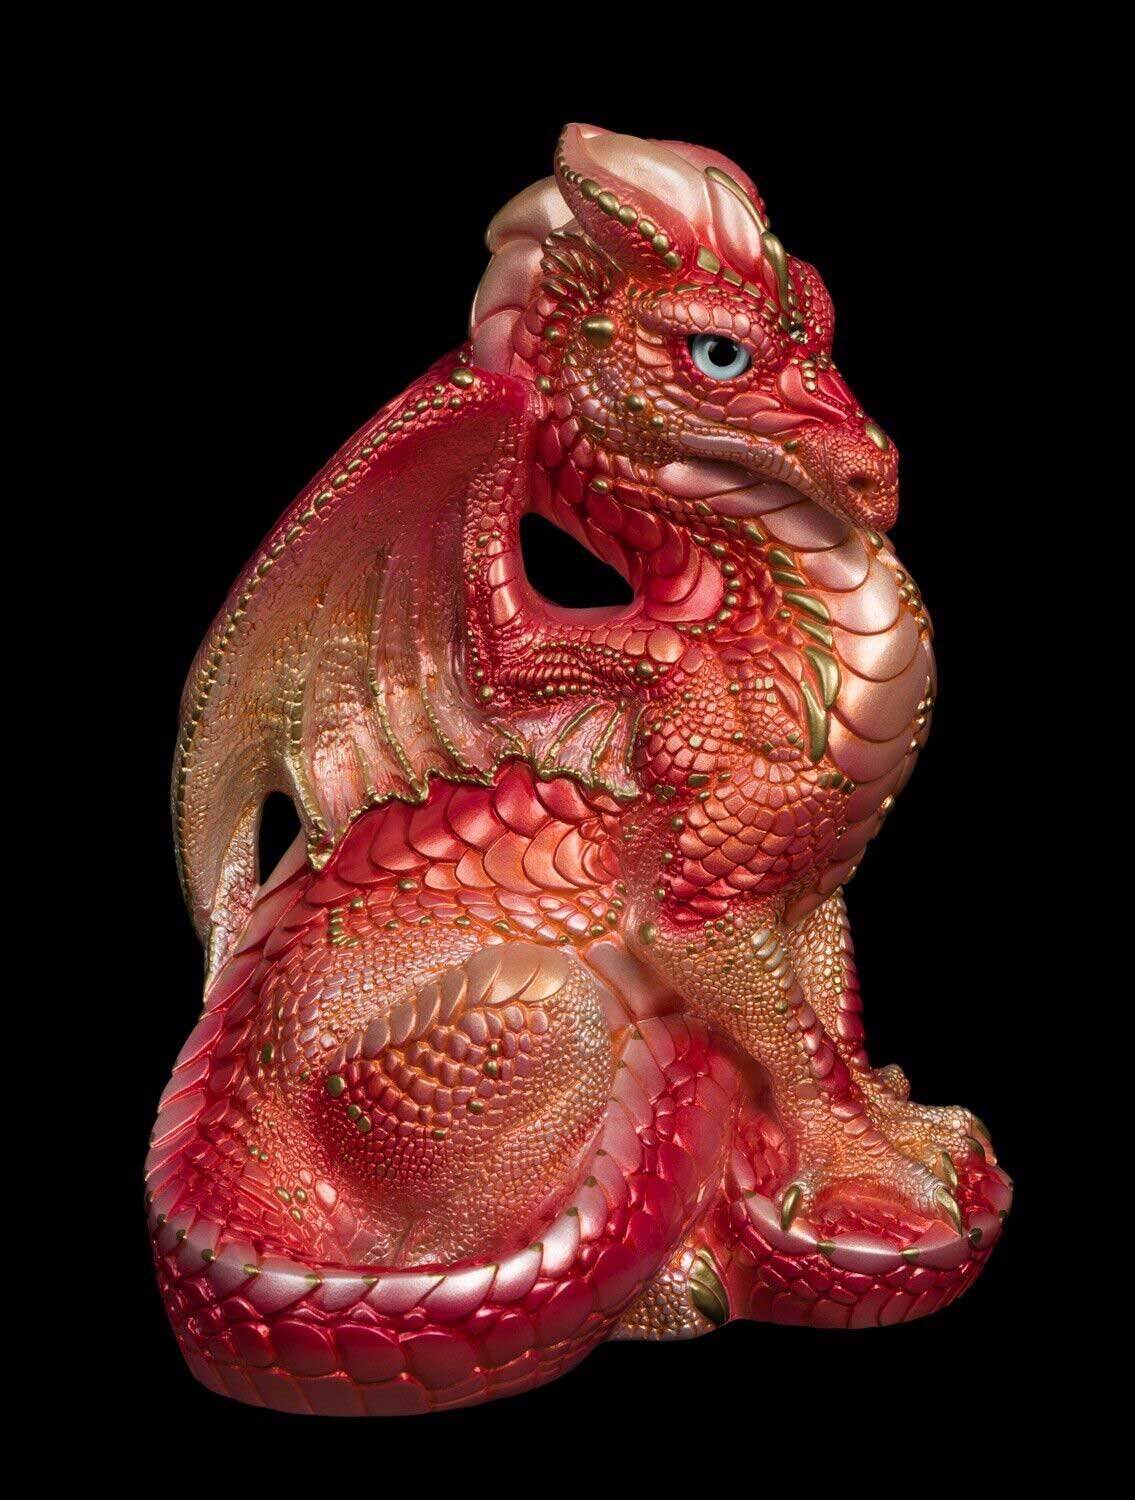 20230925-Royal-Peach-Male-Dragon-Test-Paint-1-by-Gina